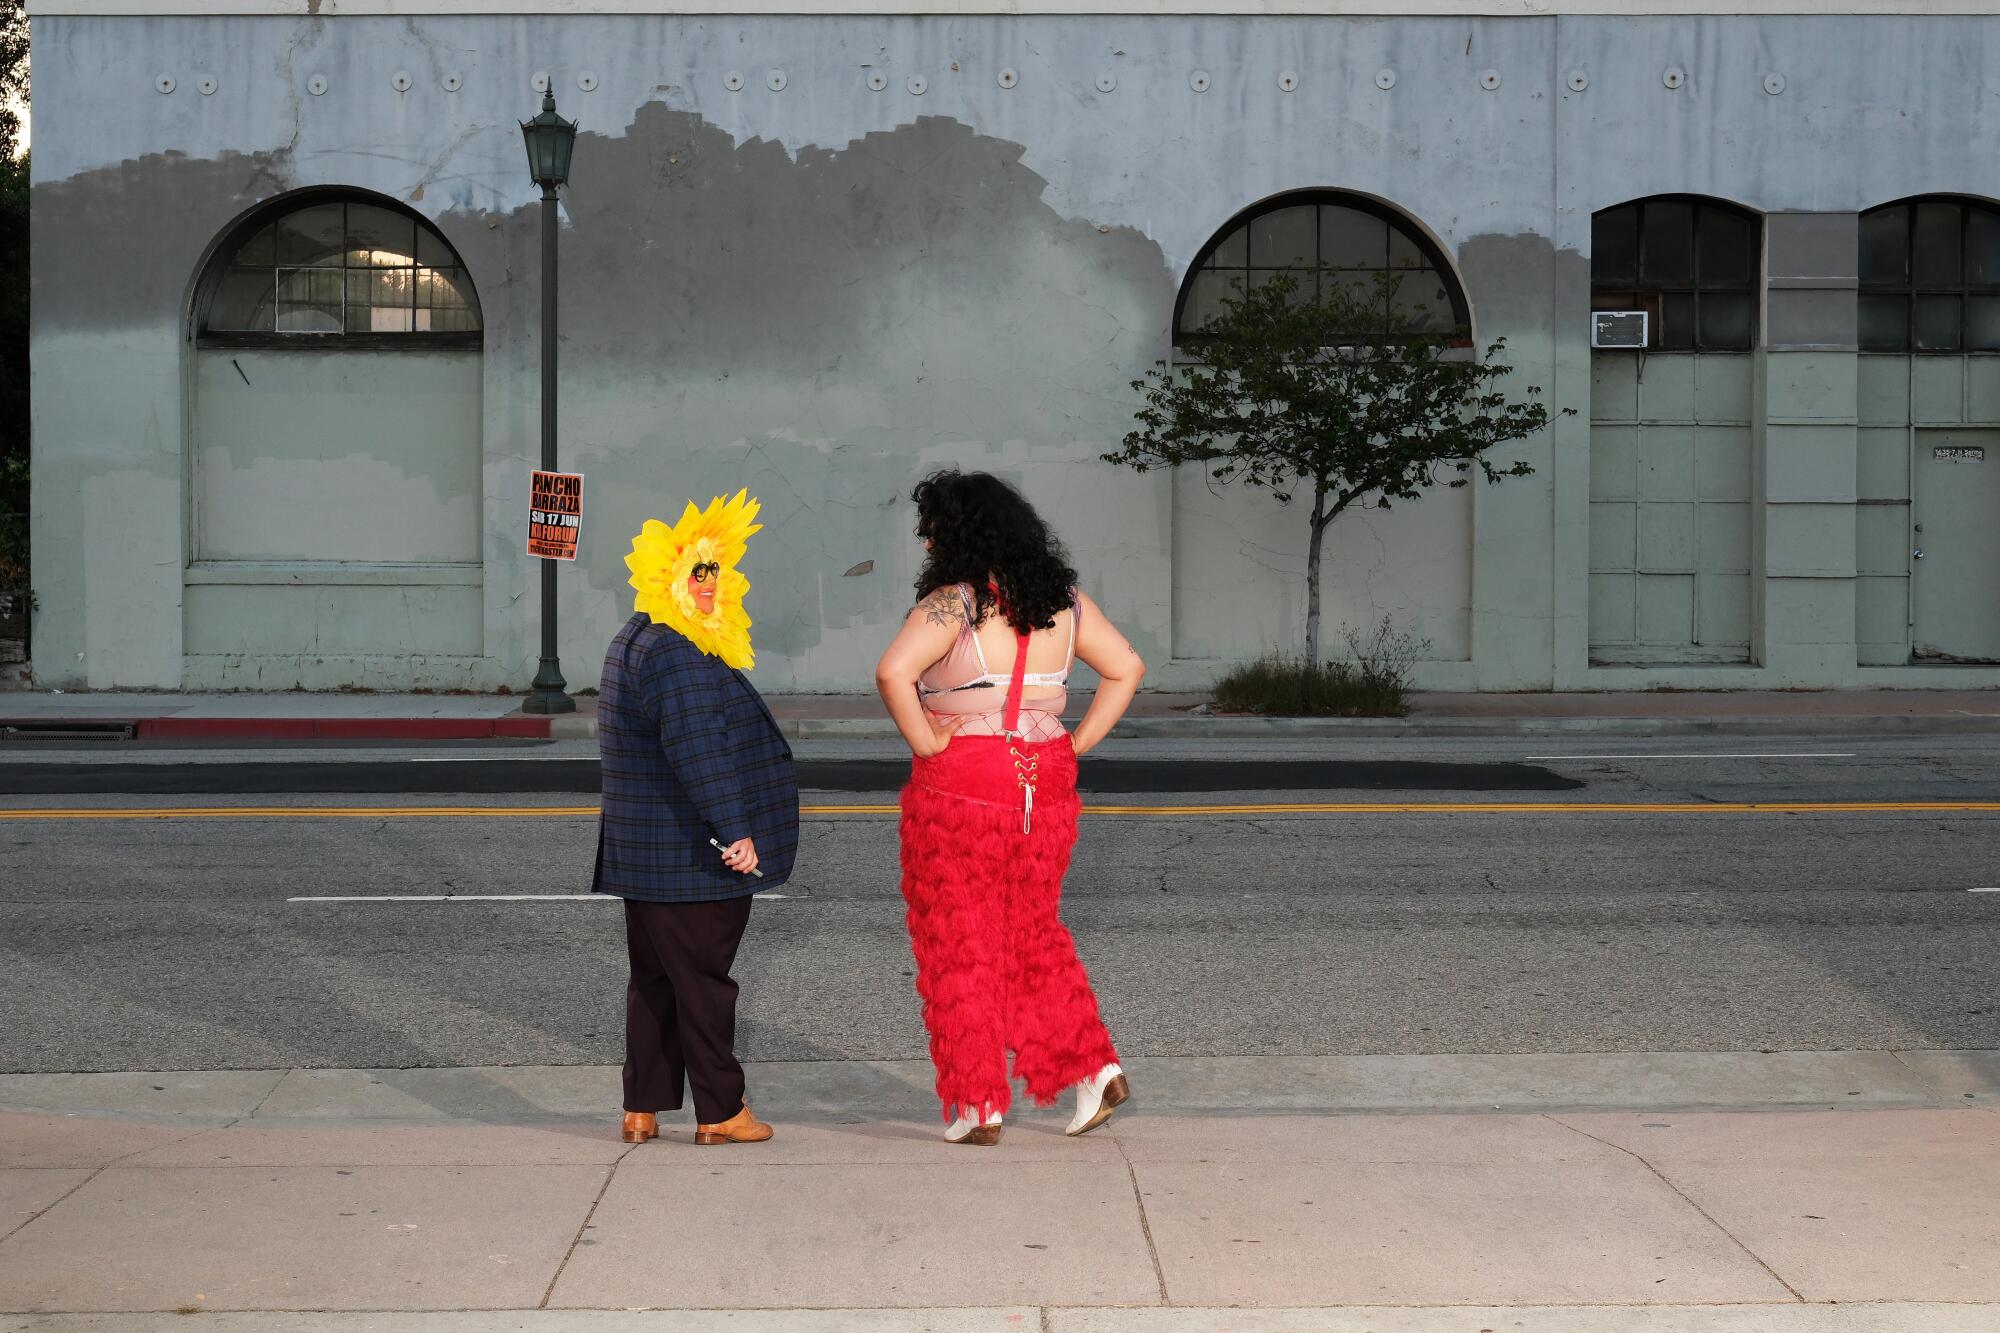 Seen from behind at a distance, a person in black suit and flower mask talks to a person in red on a sidewalk at dusk.